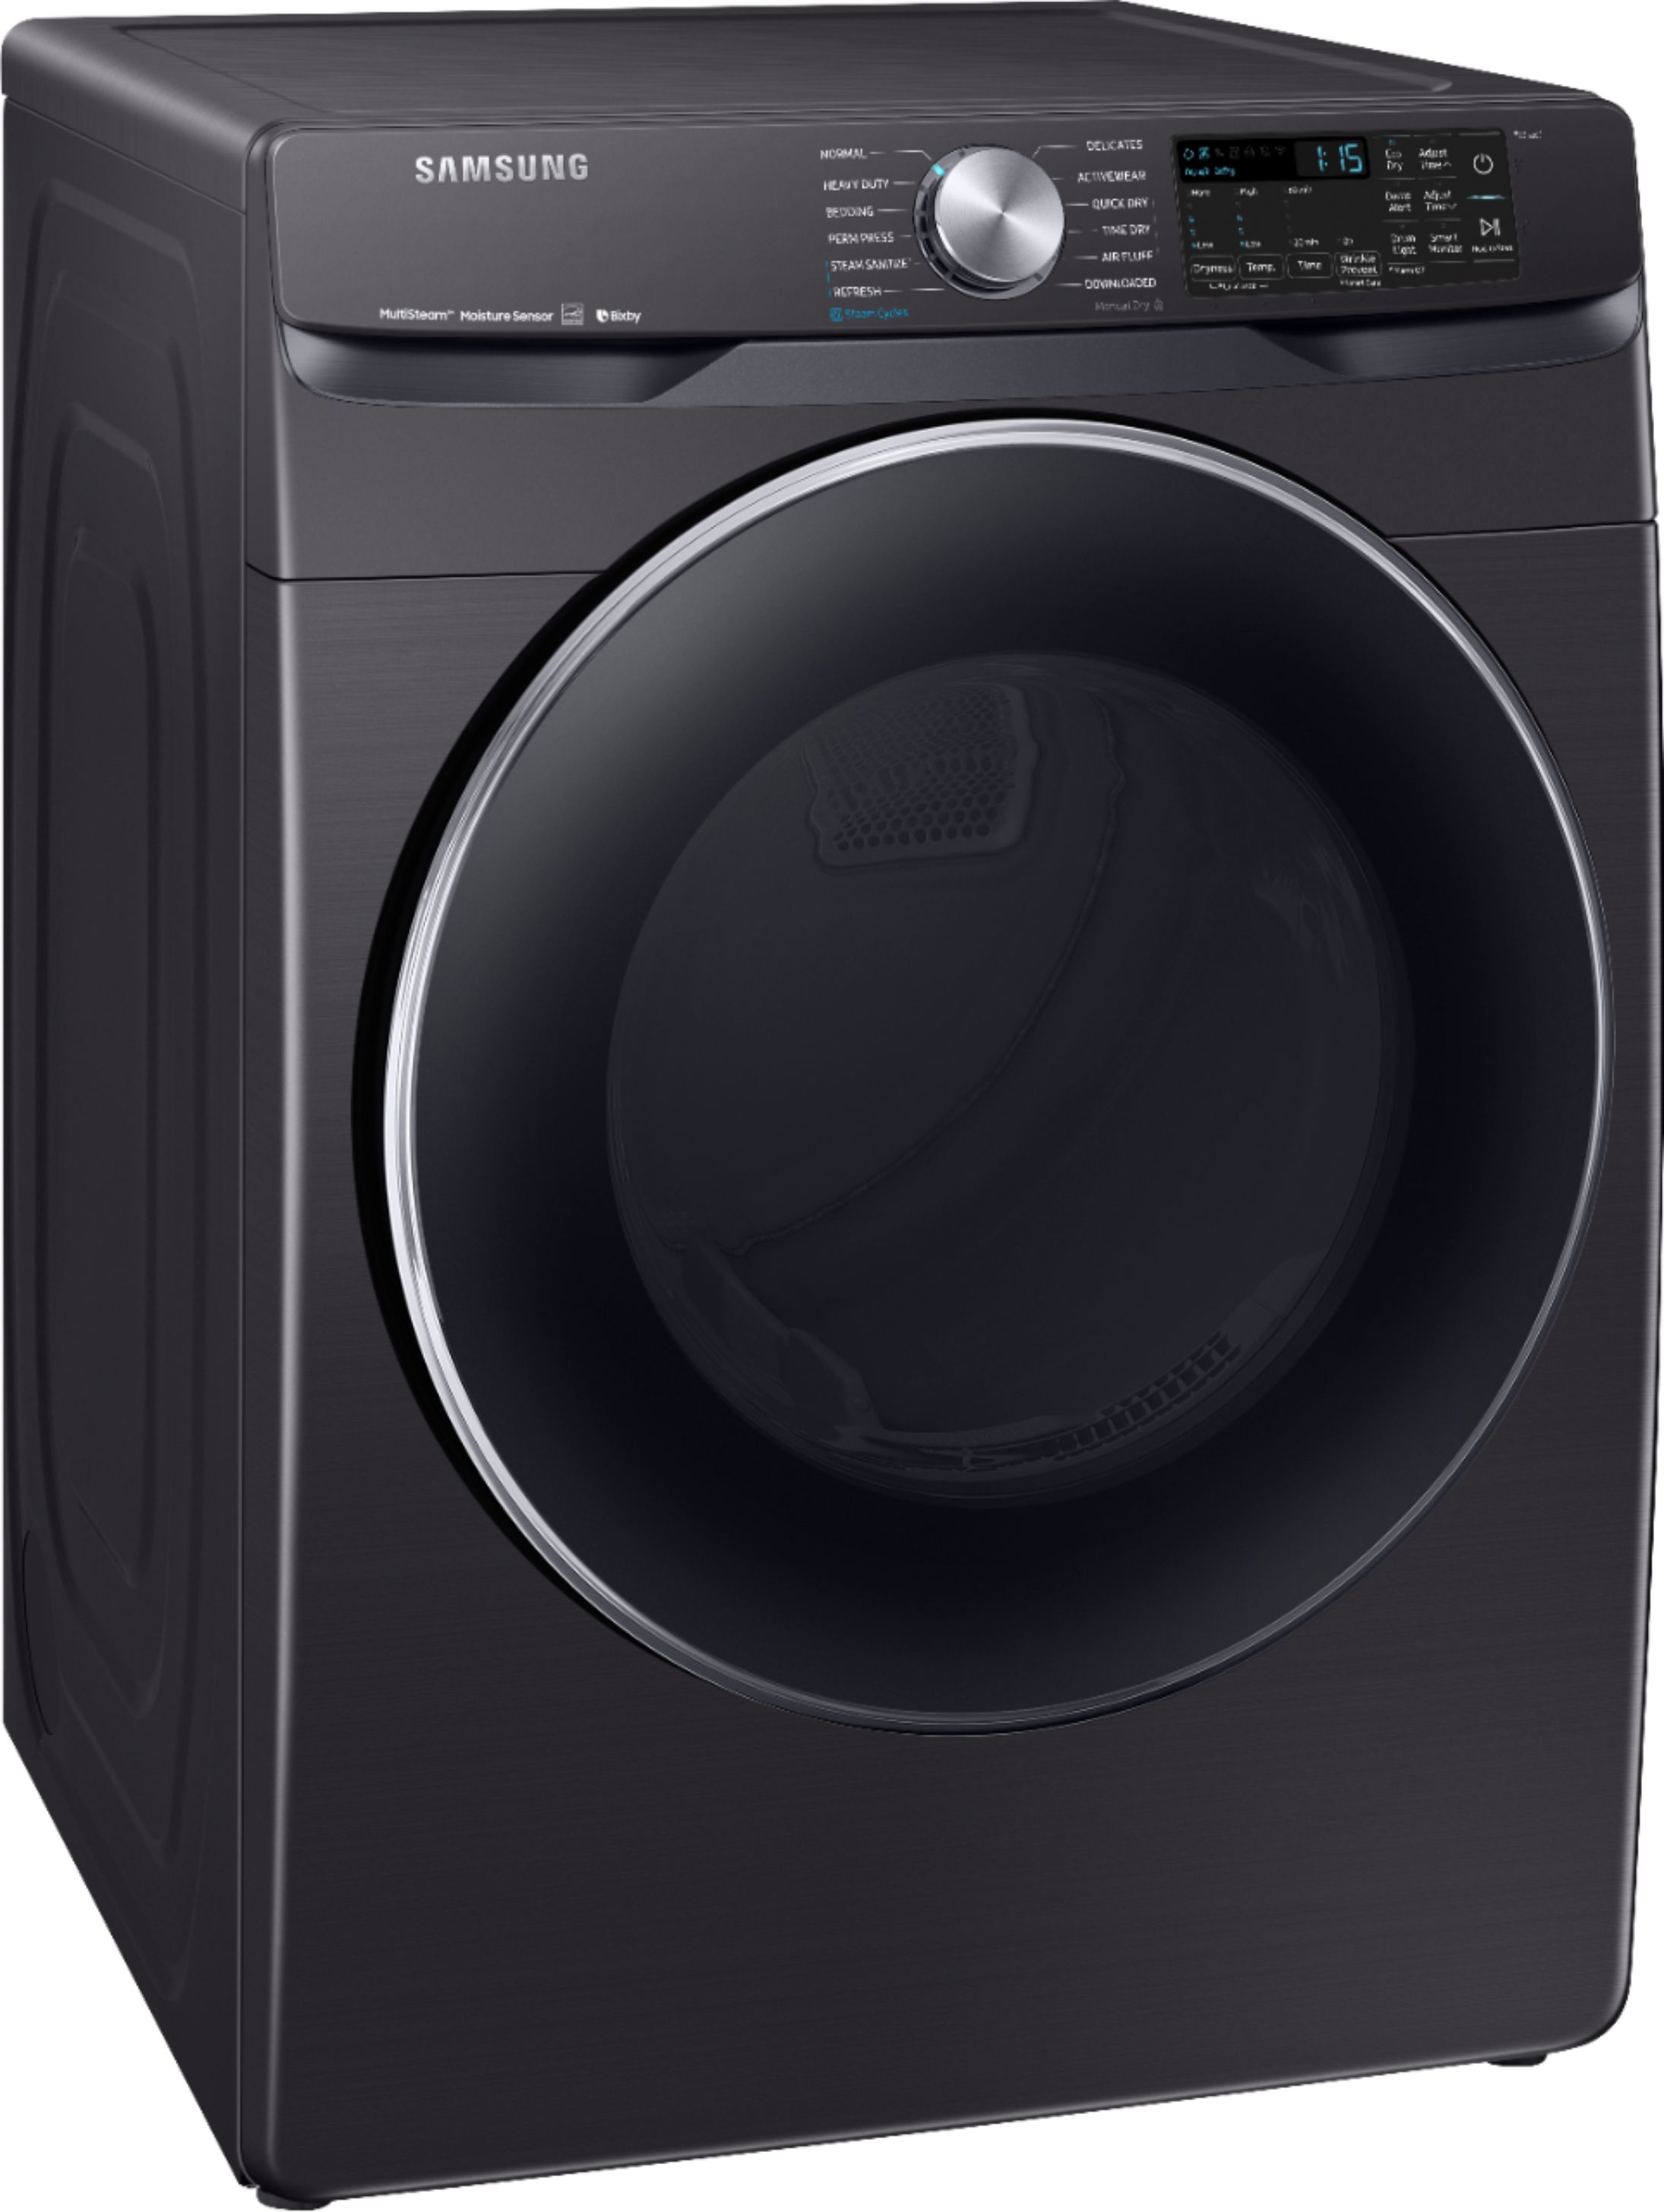 Angle View: Samsung - 7.5 Cu. Ft. Stackable Smart Electric Dryer with Steam Sanitize+ and Sensor Dry - Black stainless steel